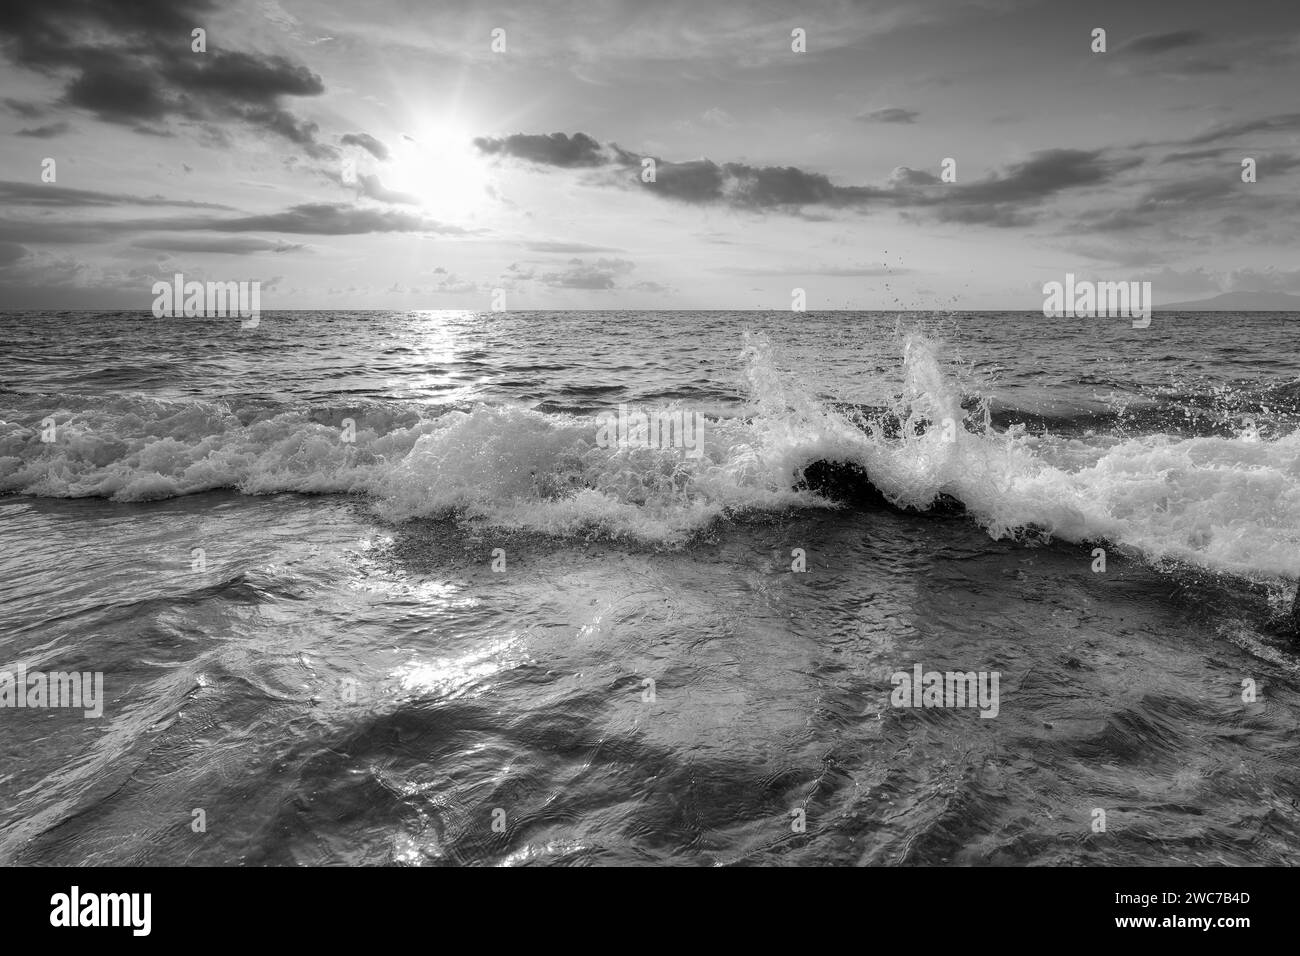 An Ocean Wave Is Splashing Droplets Of water With Sun Rays Breaking Through Clouds Black And White Image Stock Photo